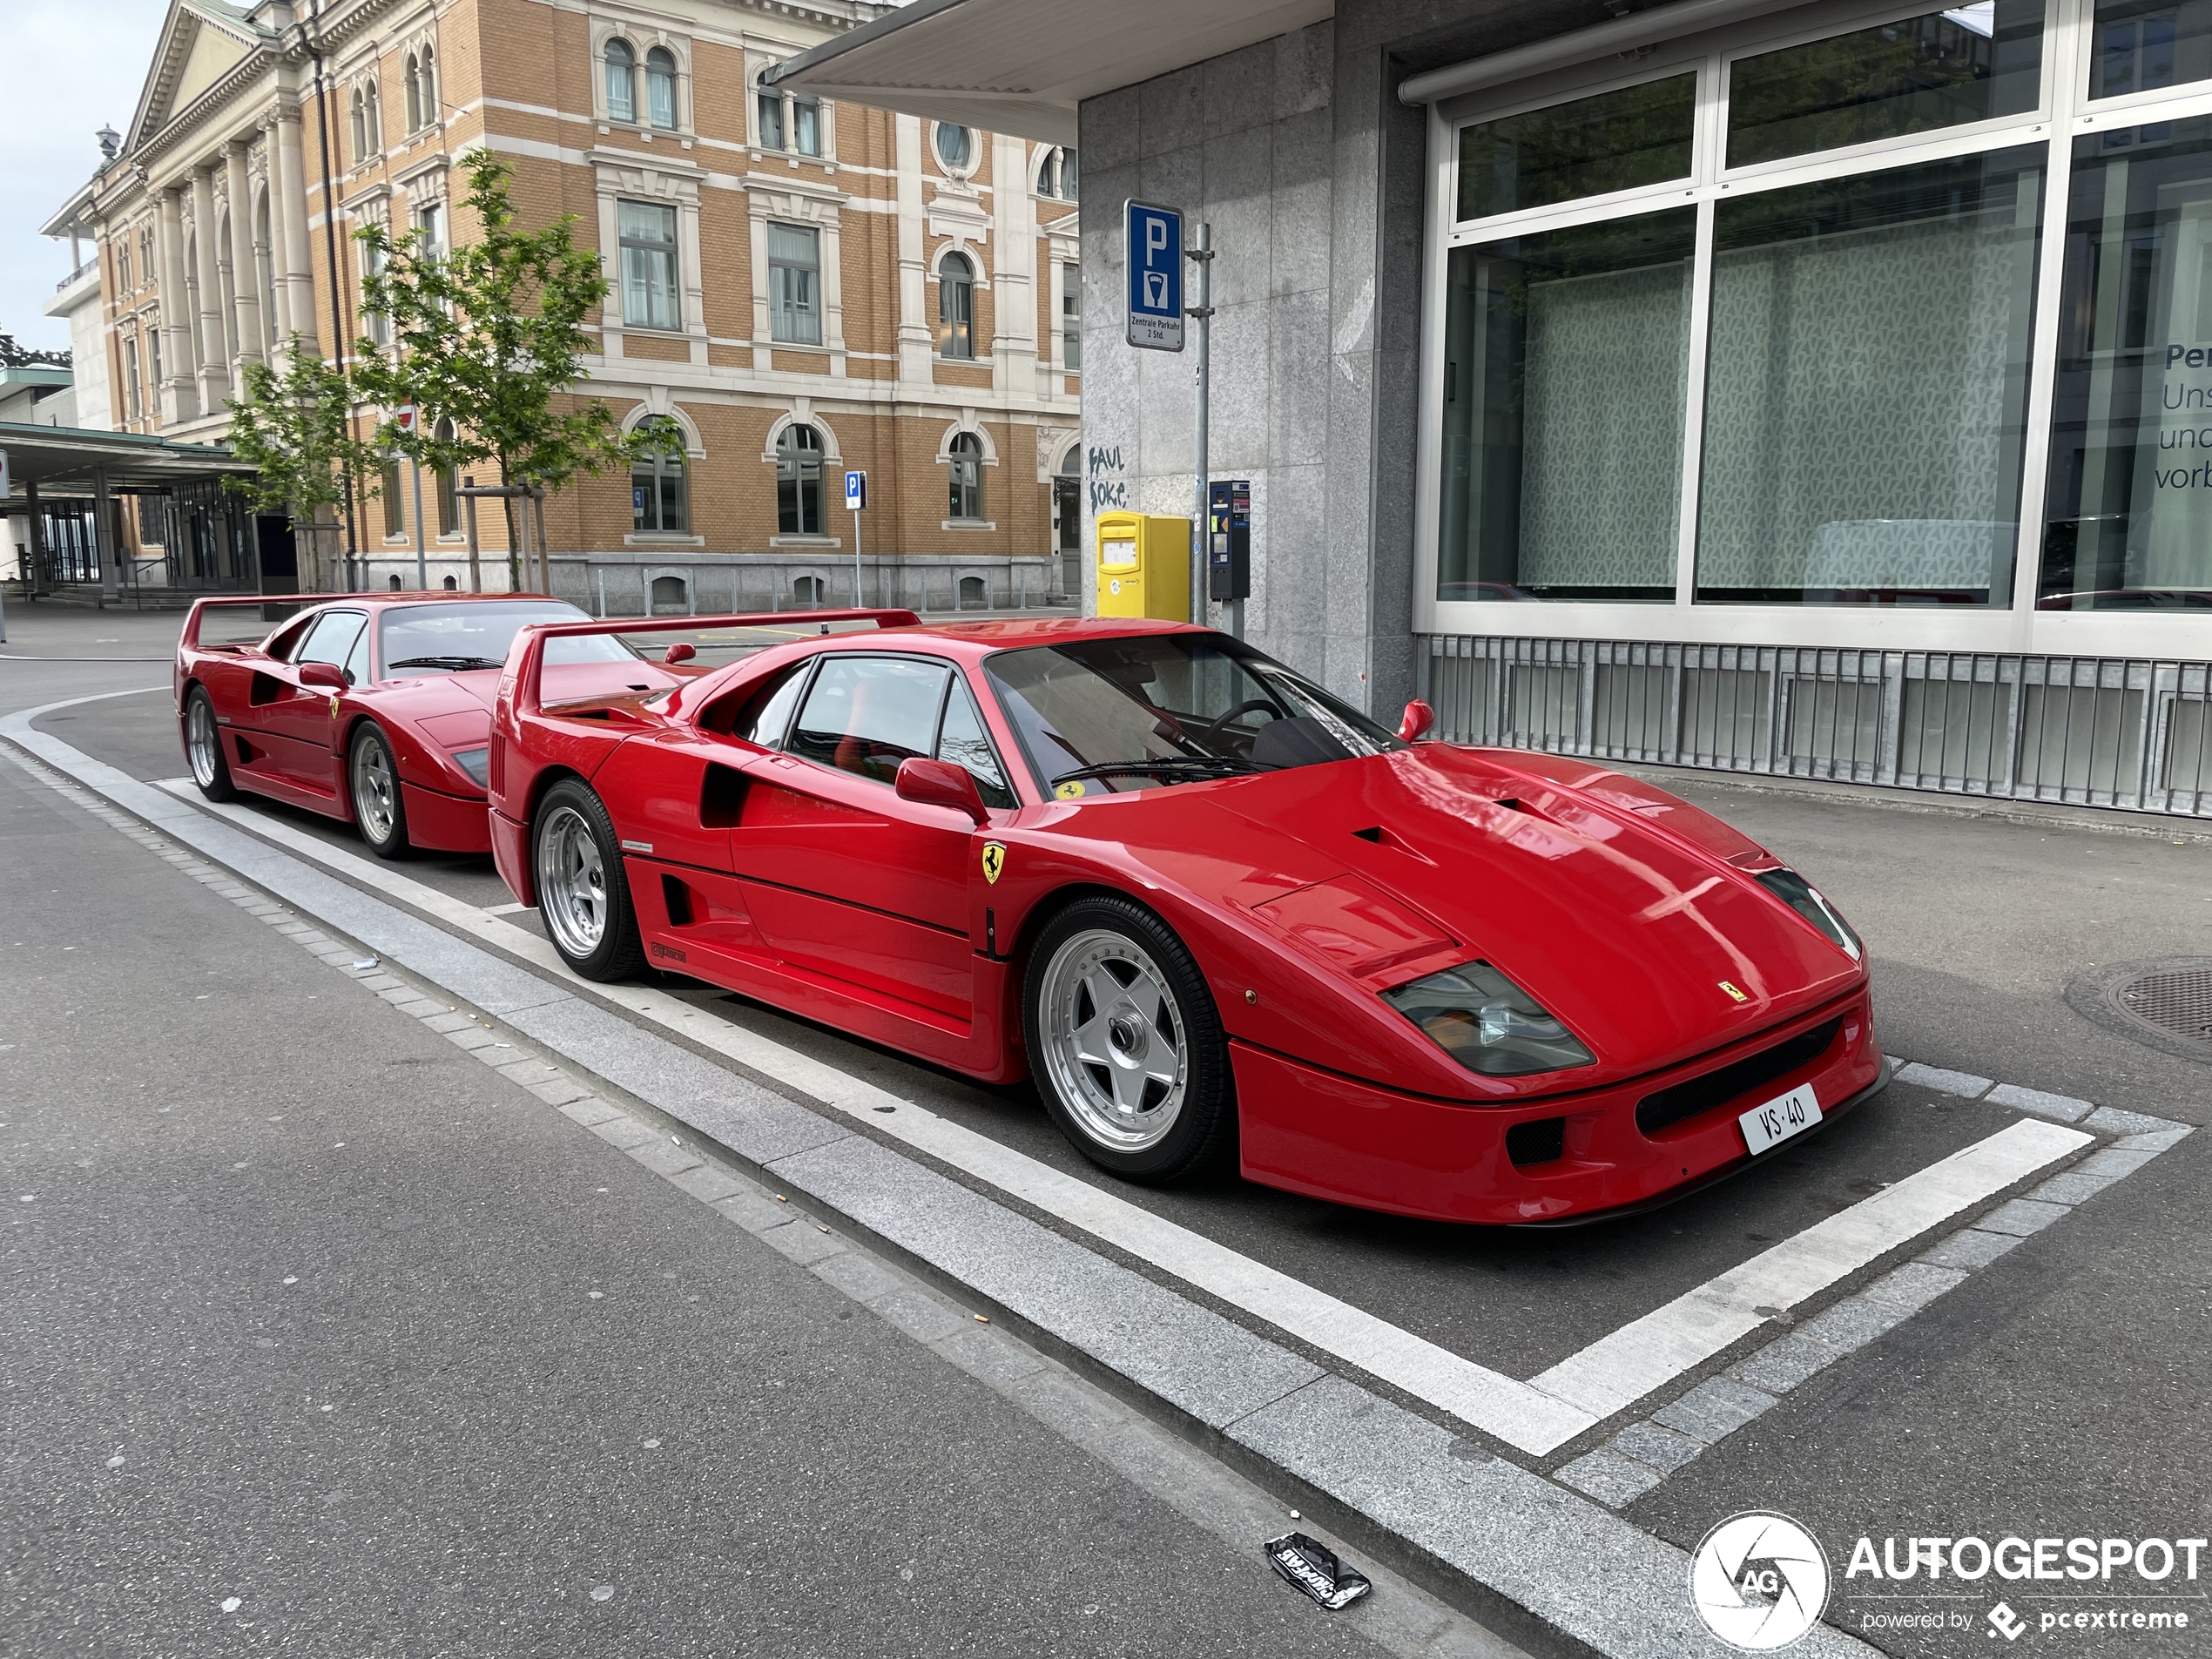 A single F40 doesn't seem to suffice